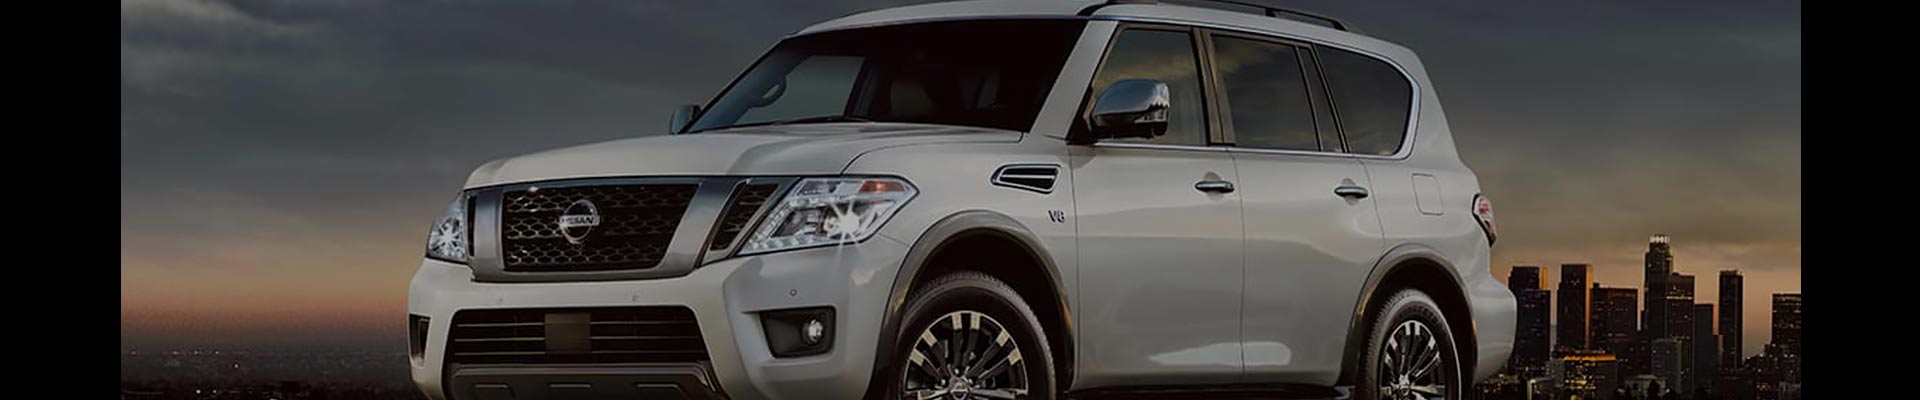 Shop Replacement and OEM 2019 Nissan Armada Parts with Discounted Price on the Net